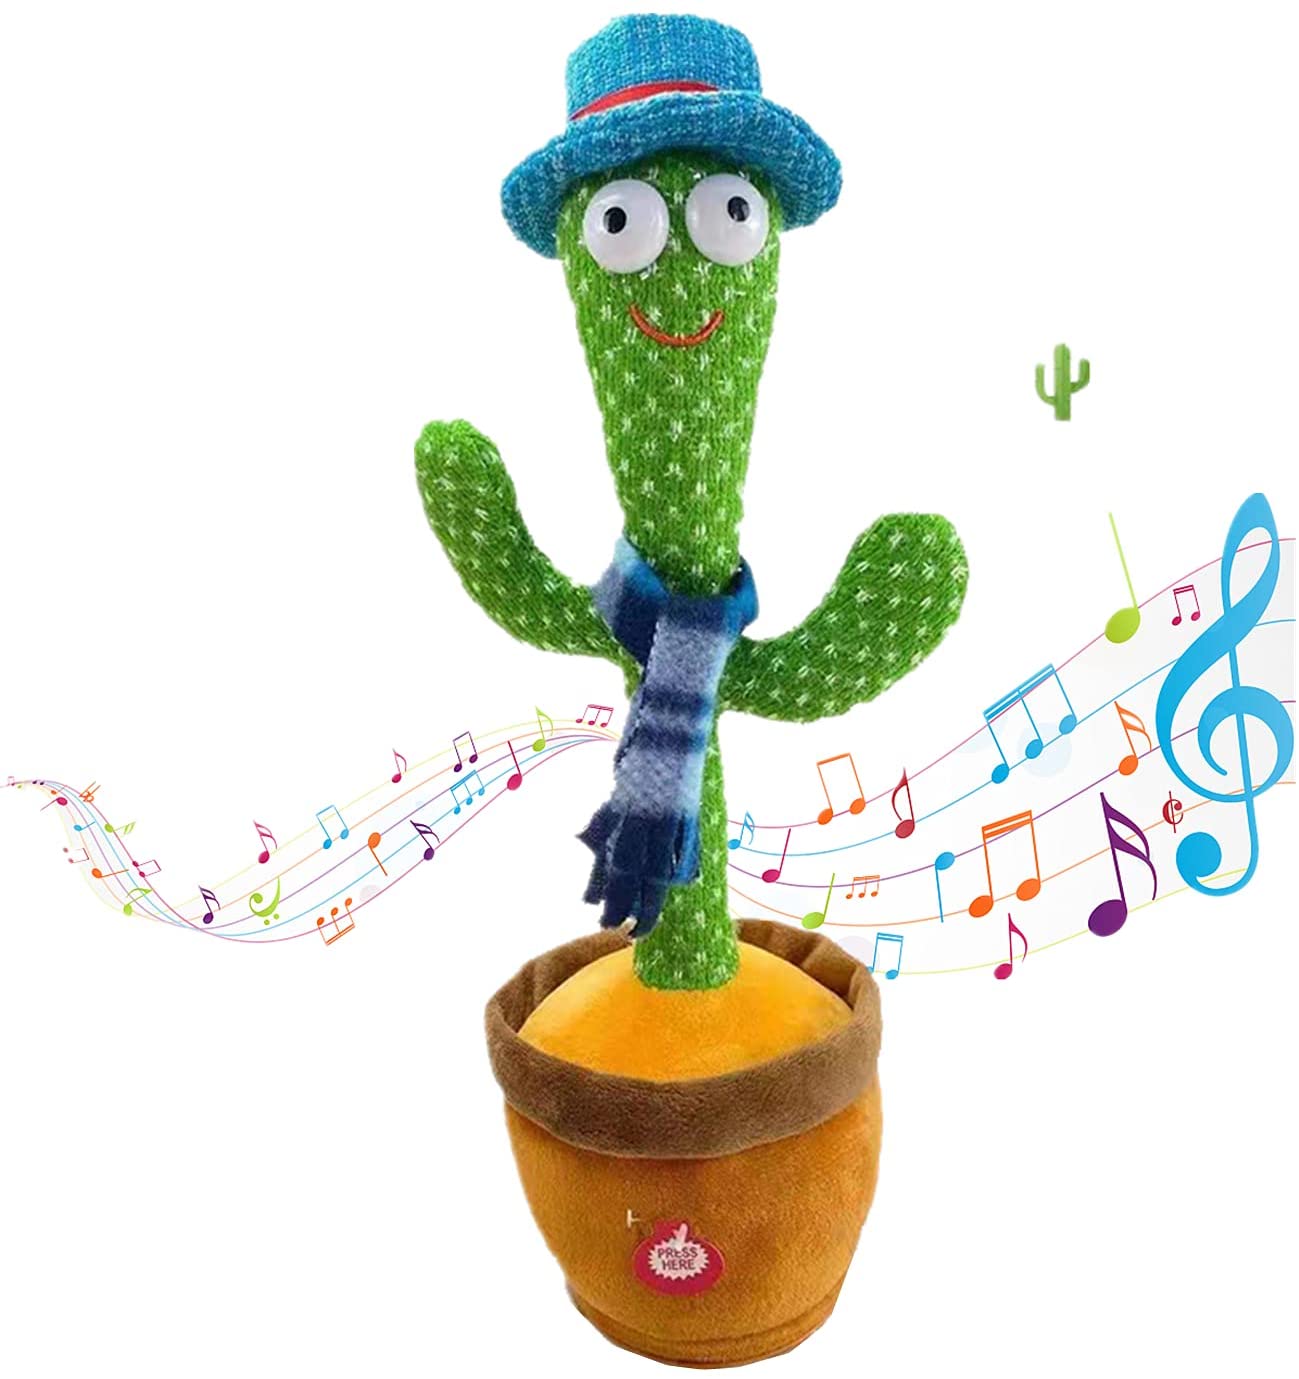 Dancing Cactus Recording and Repeats What You Say Singing Cactus Recording and Repeat for Education Toys Electronic Plush Toy with Lighting Cactus Plush Toy for Decor-or Singing Cactus Toy 